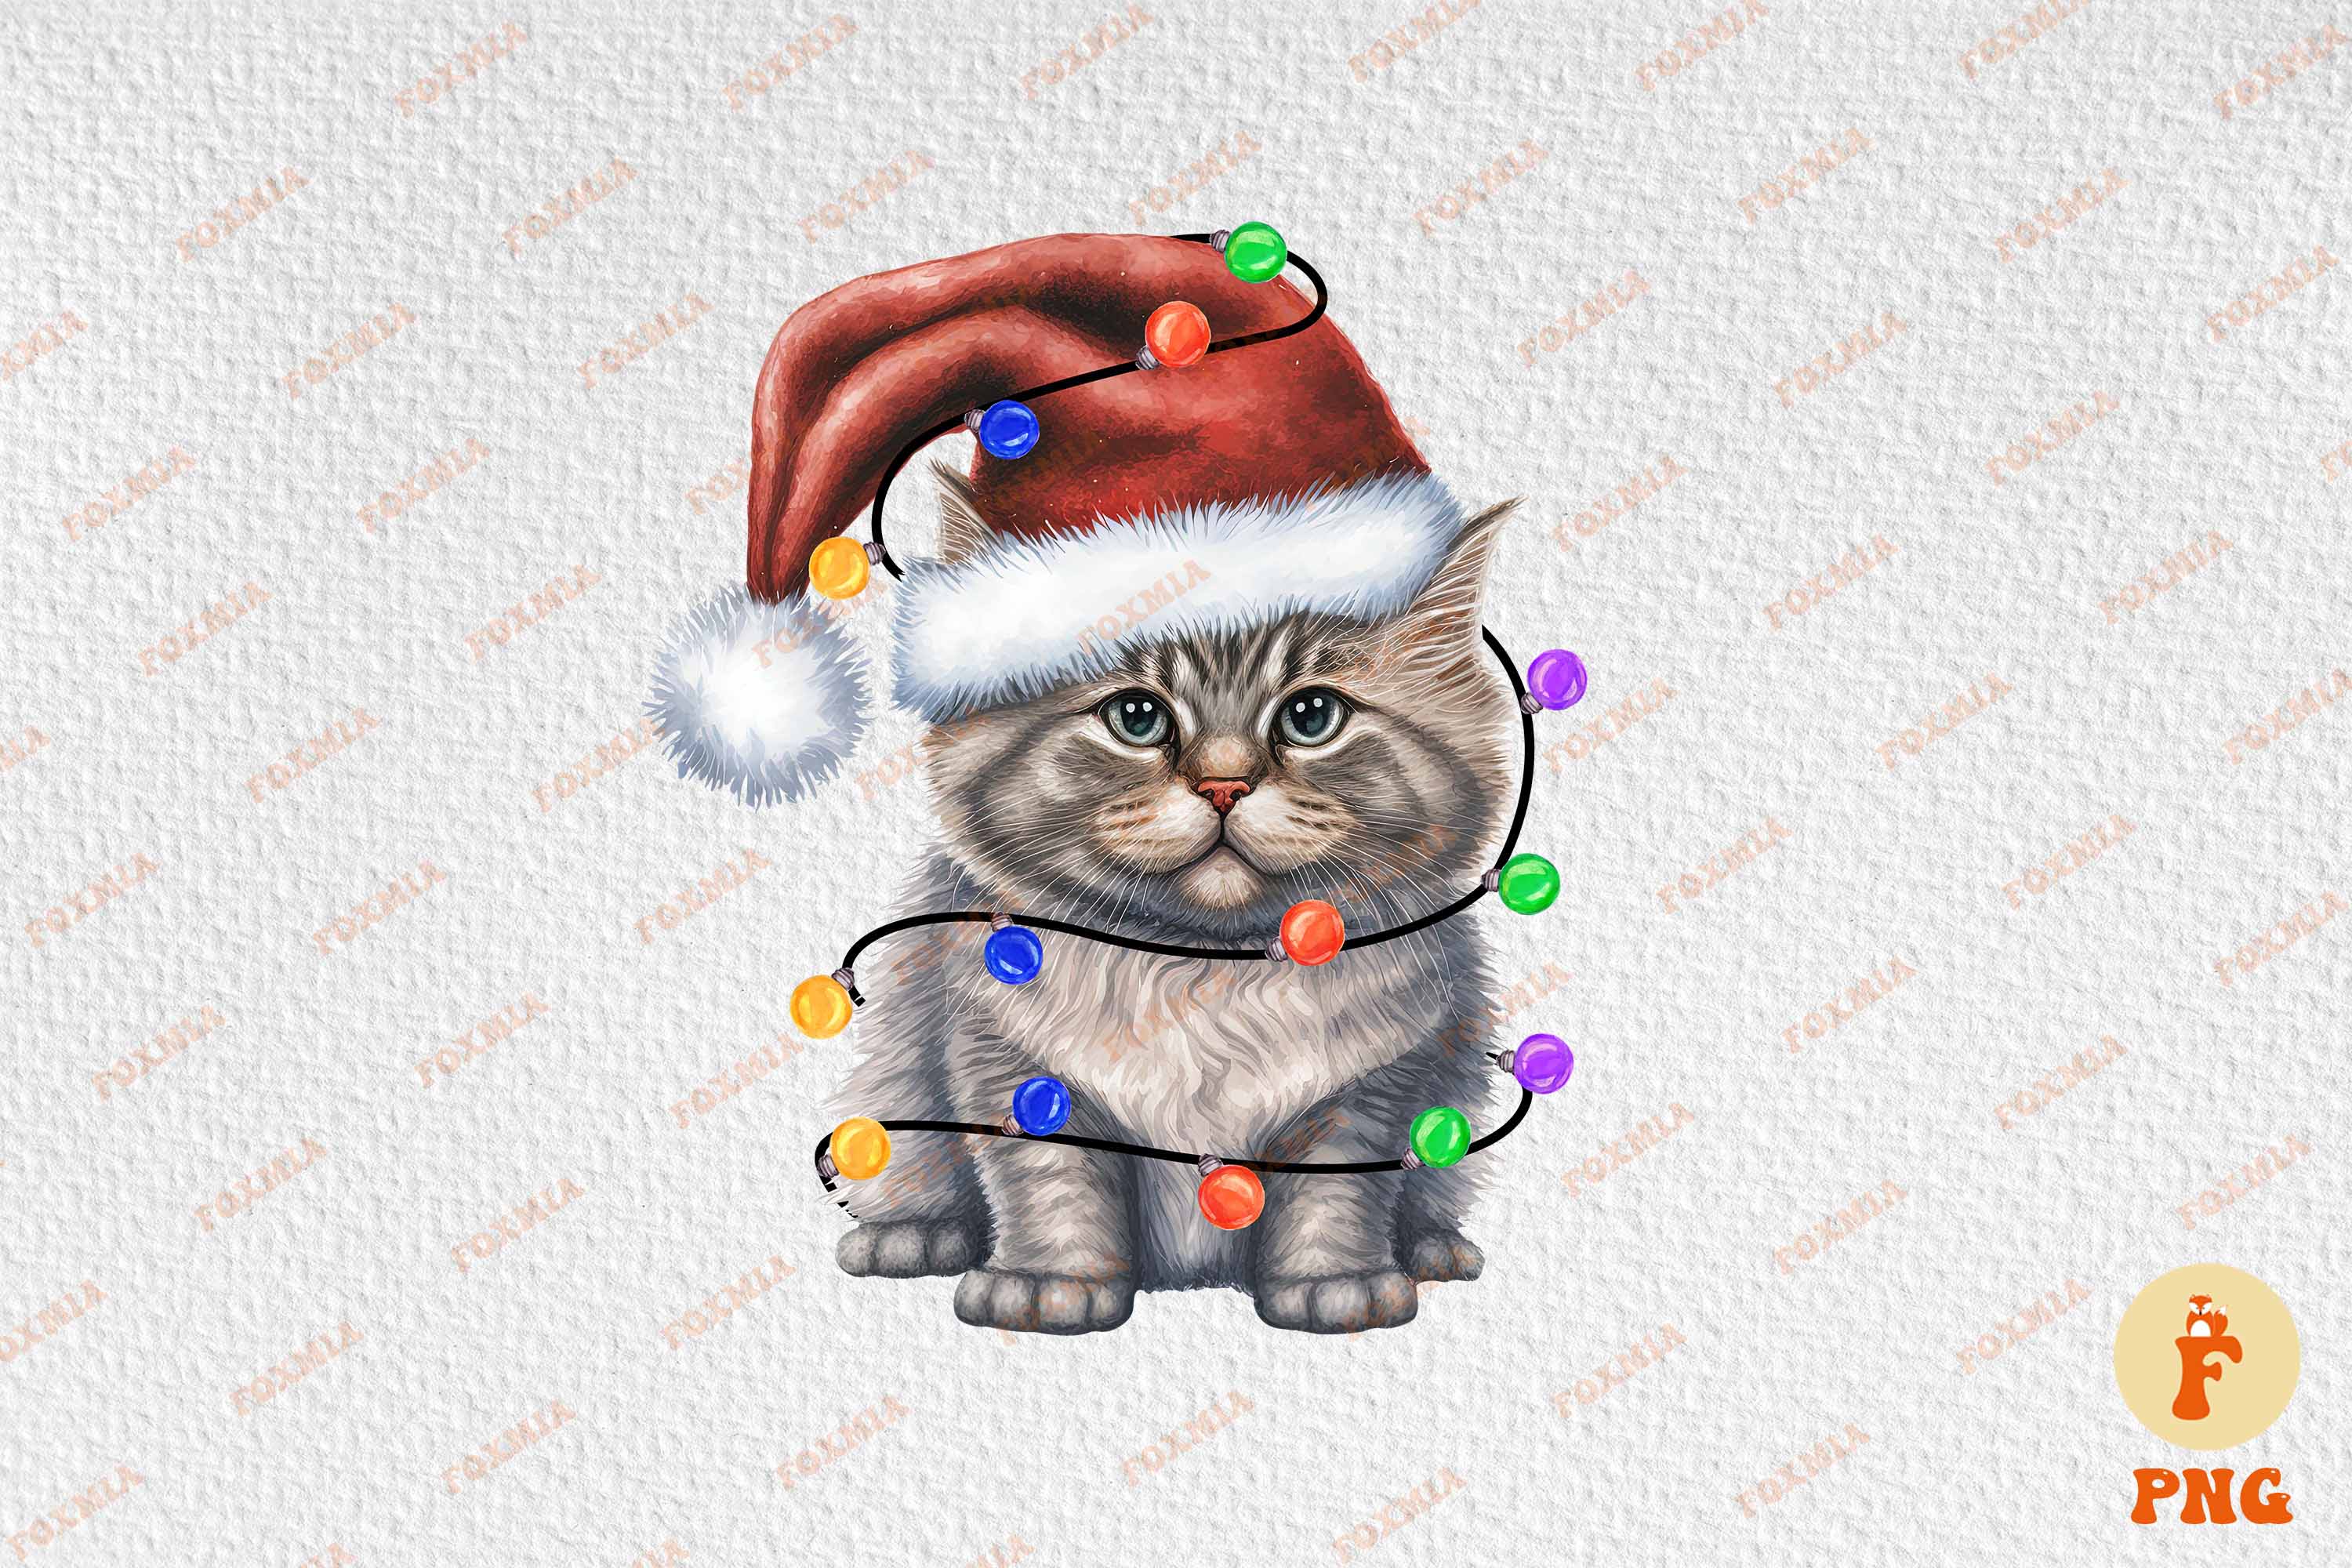 Colorful image of a cat in a santa hat.